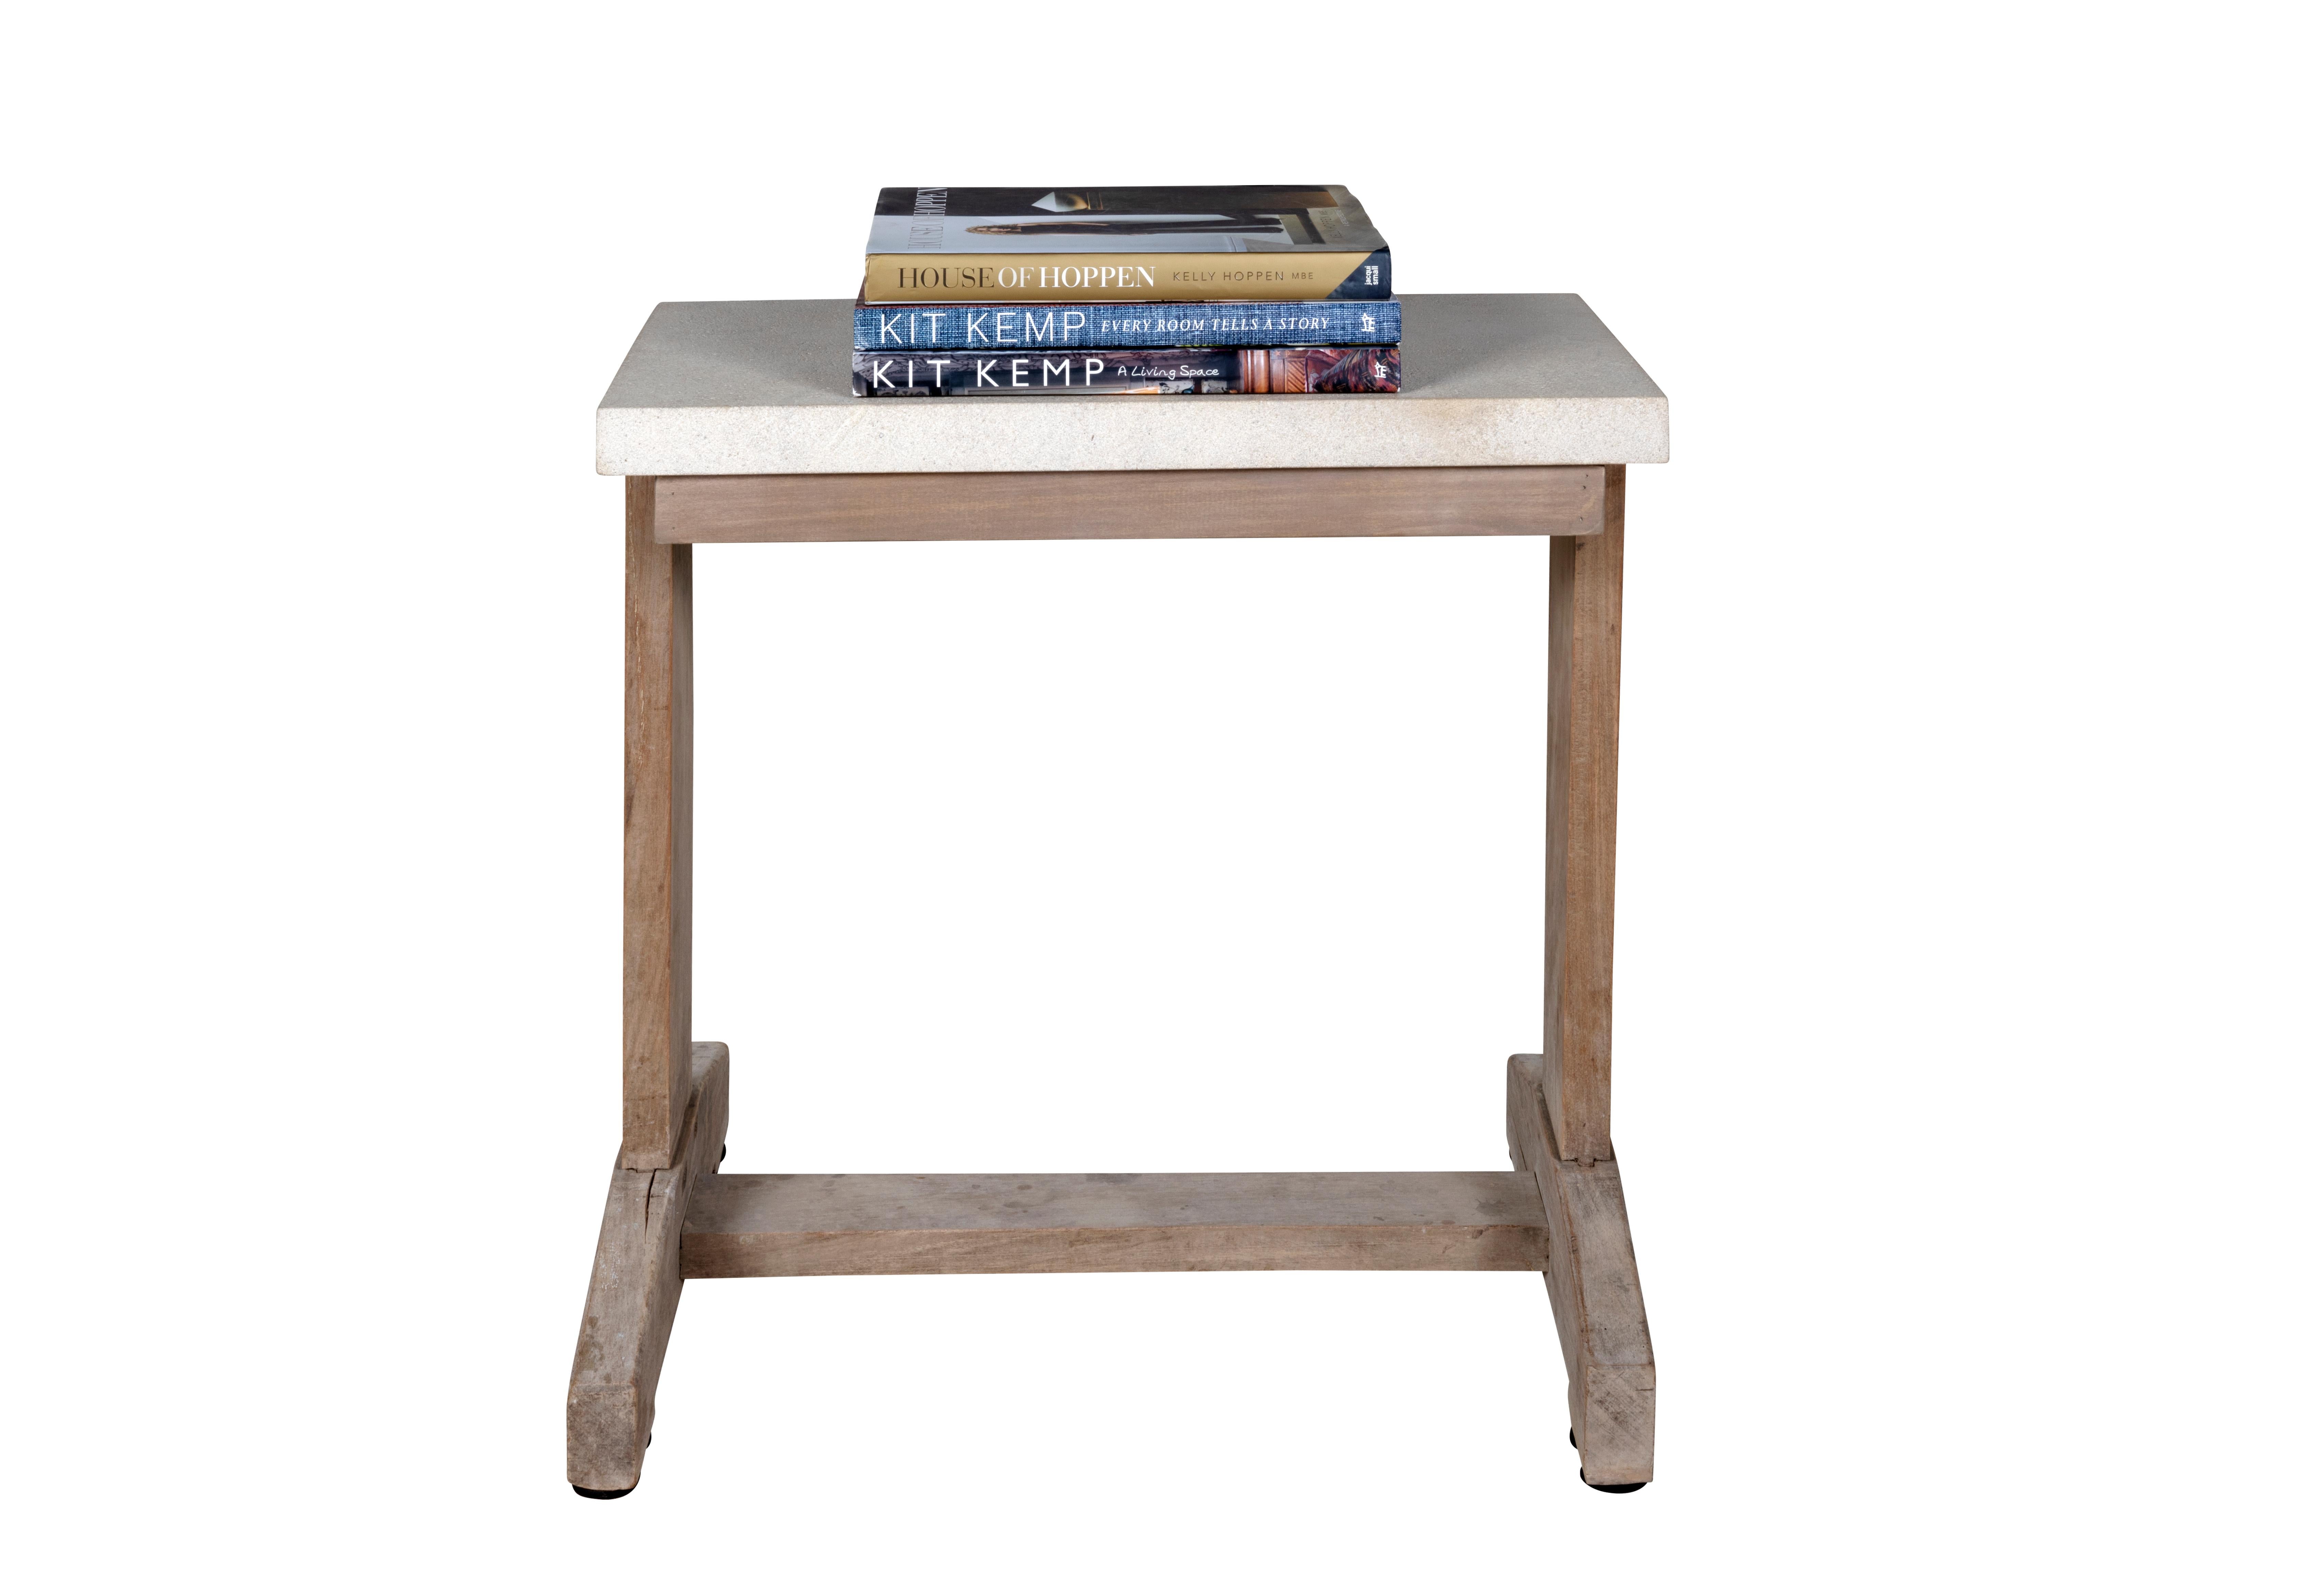 Vintage bleached oak side table with custom cut limestone top.

The piece is a part of our one-of-a-kind collection, Le Monde. Exclusive to us. 

Globally curated by Brendan Bass, Le Monde furniture and accessories offer modern sensibility,